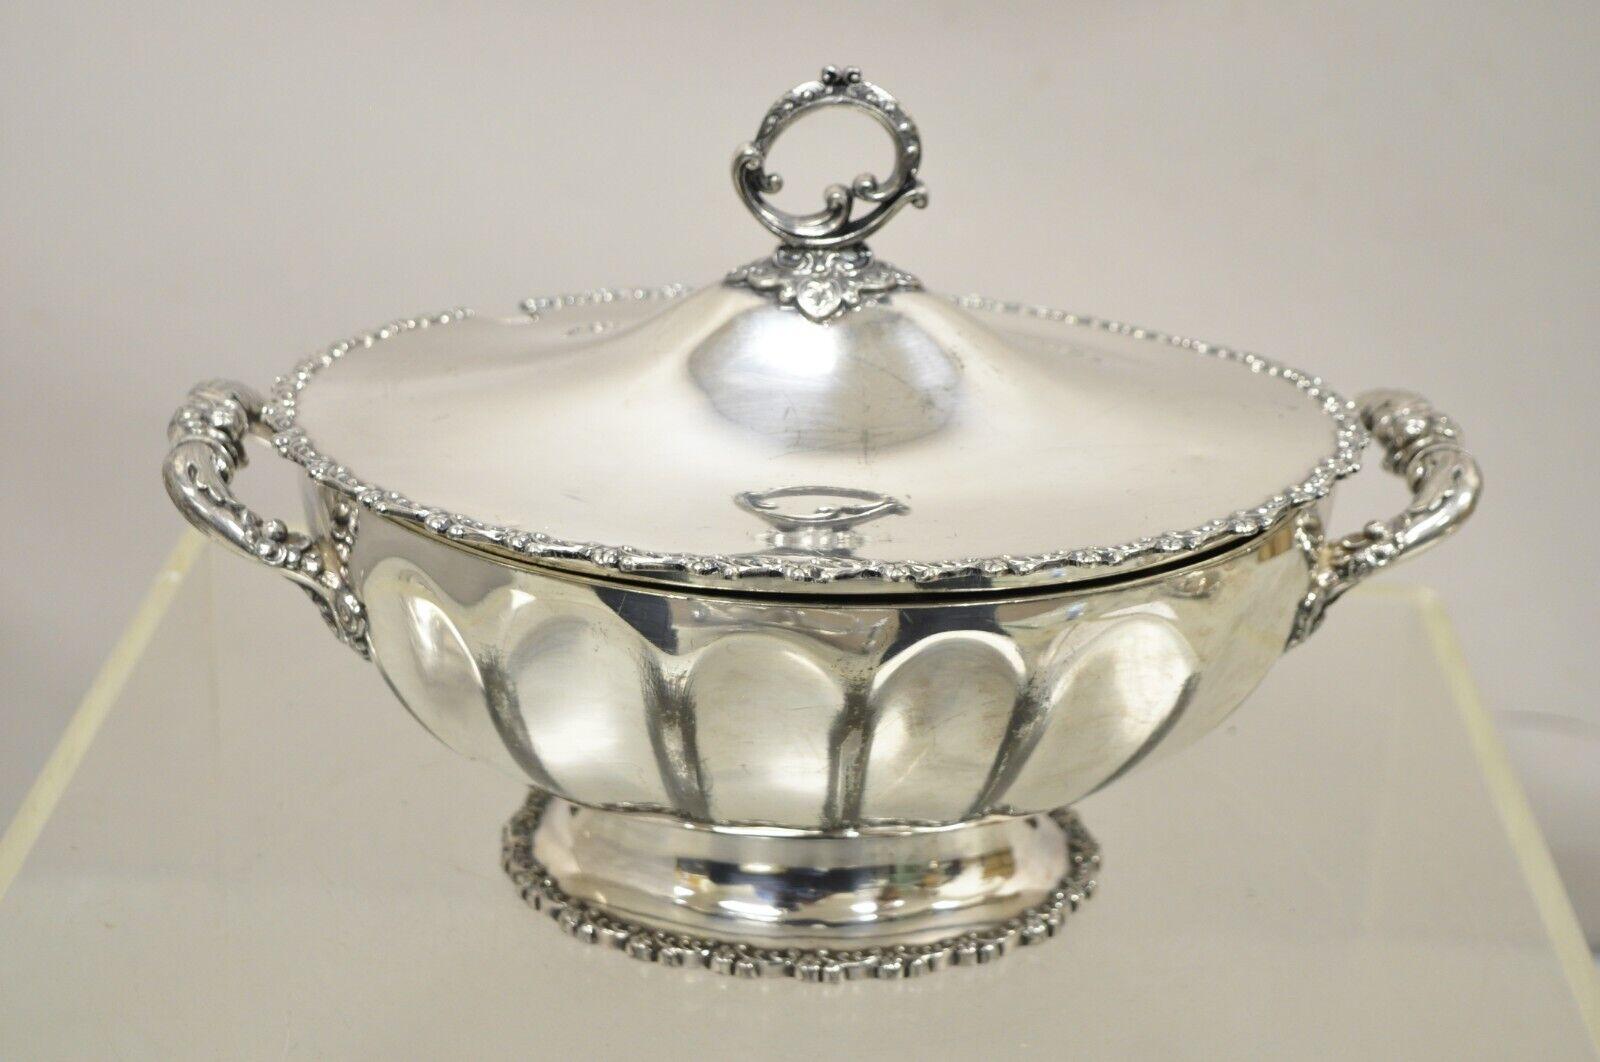 Antique Wilcox Silverplate Co Silver Plated Victorian Lidded Soup Tureen Bowl - B Monogram. Item features a 